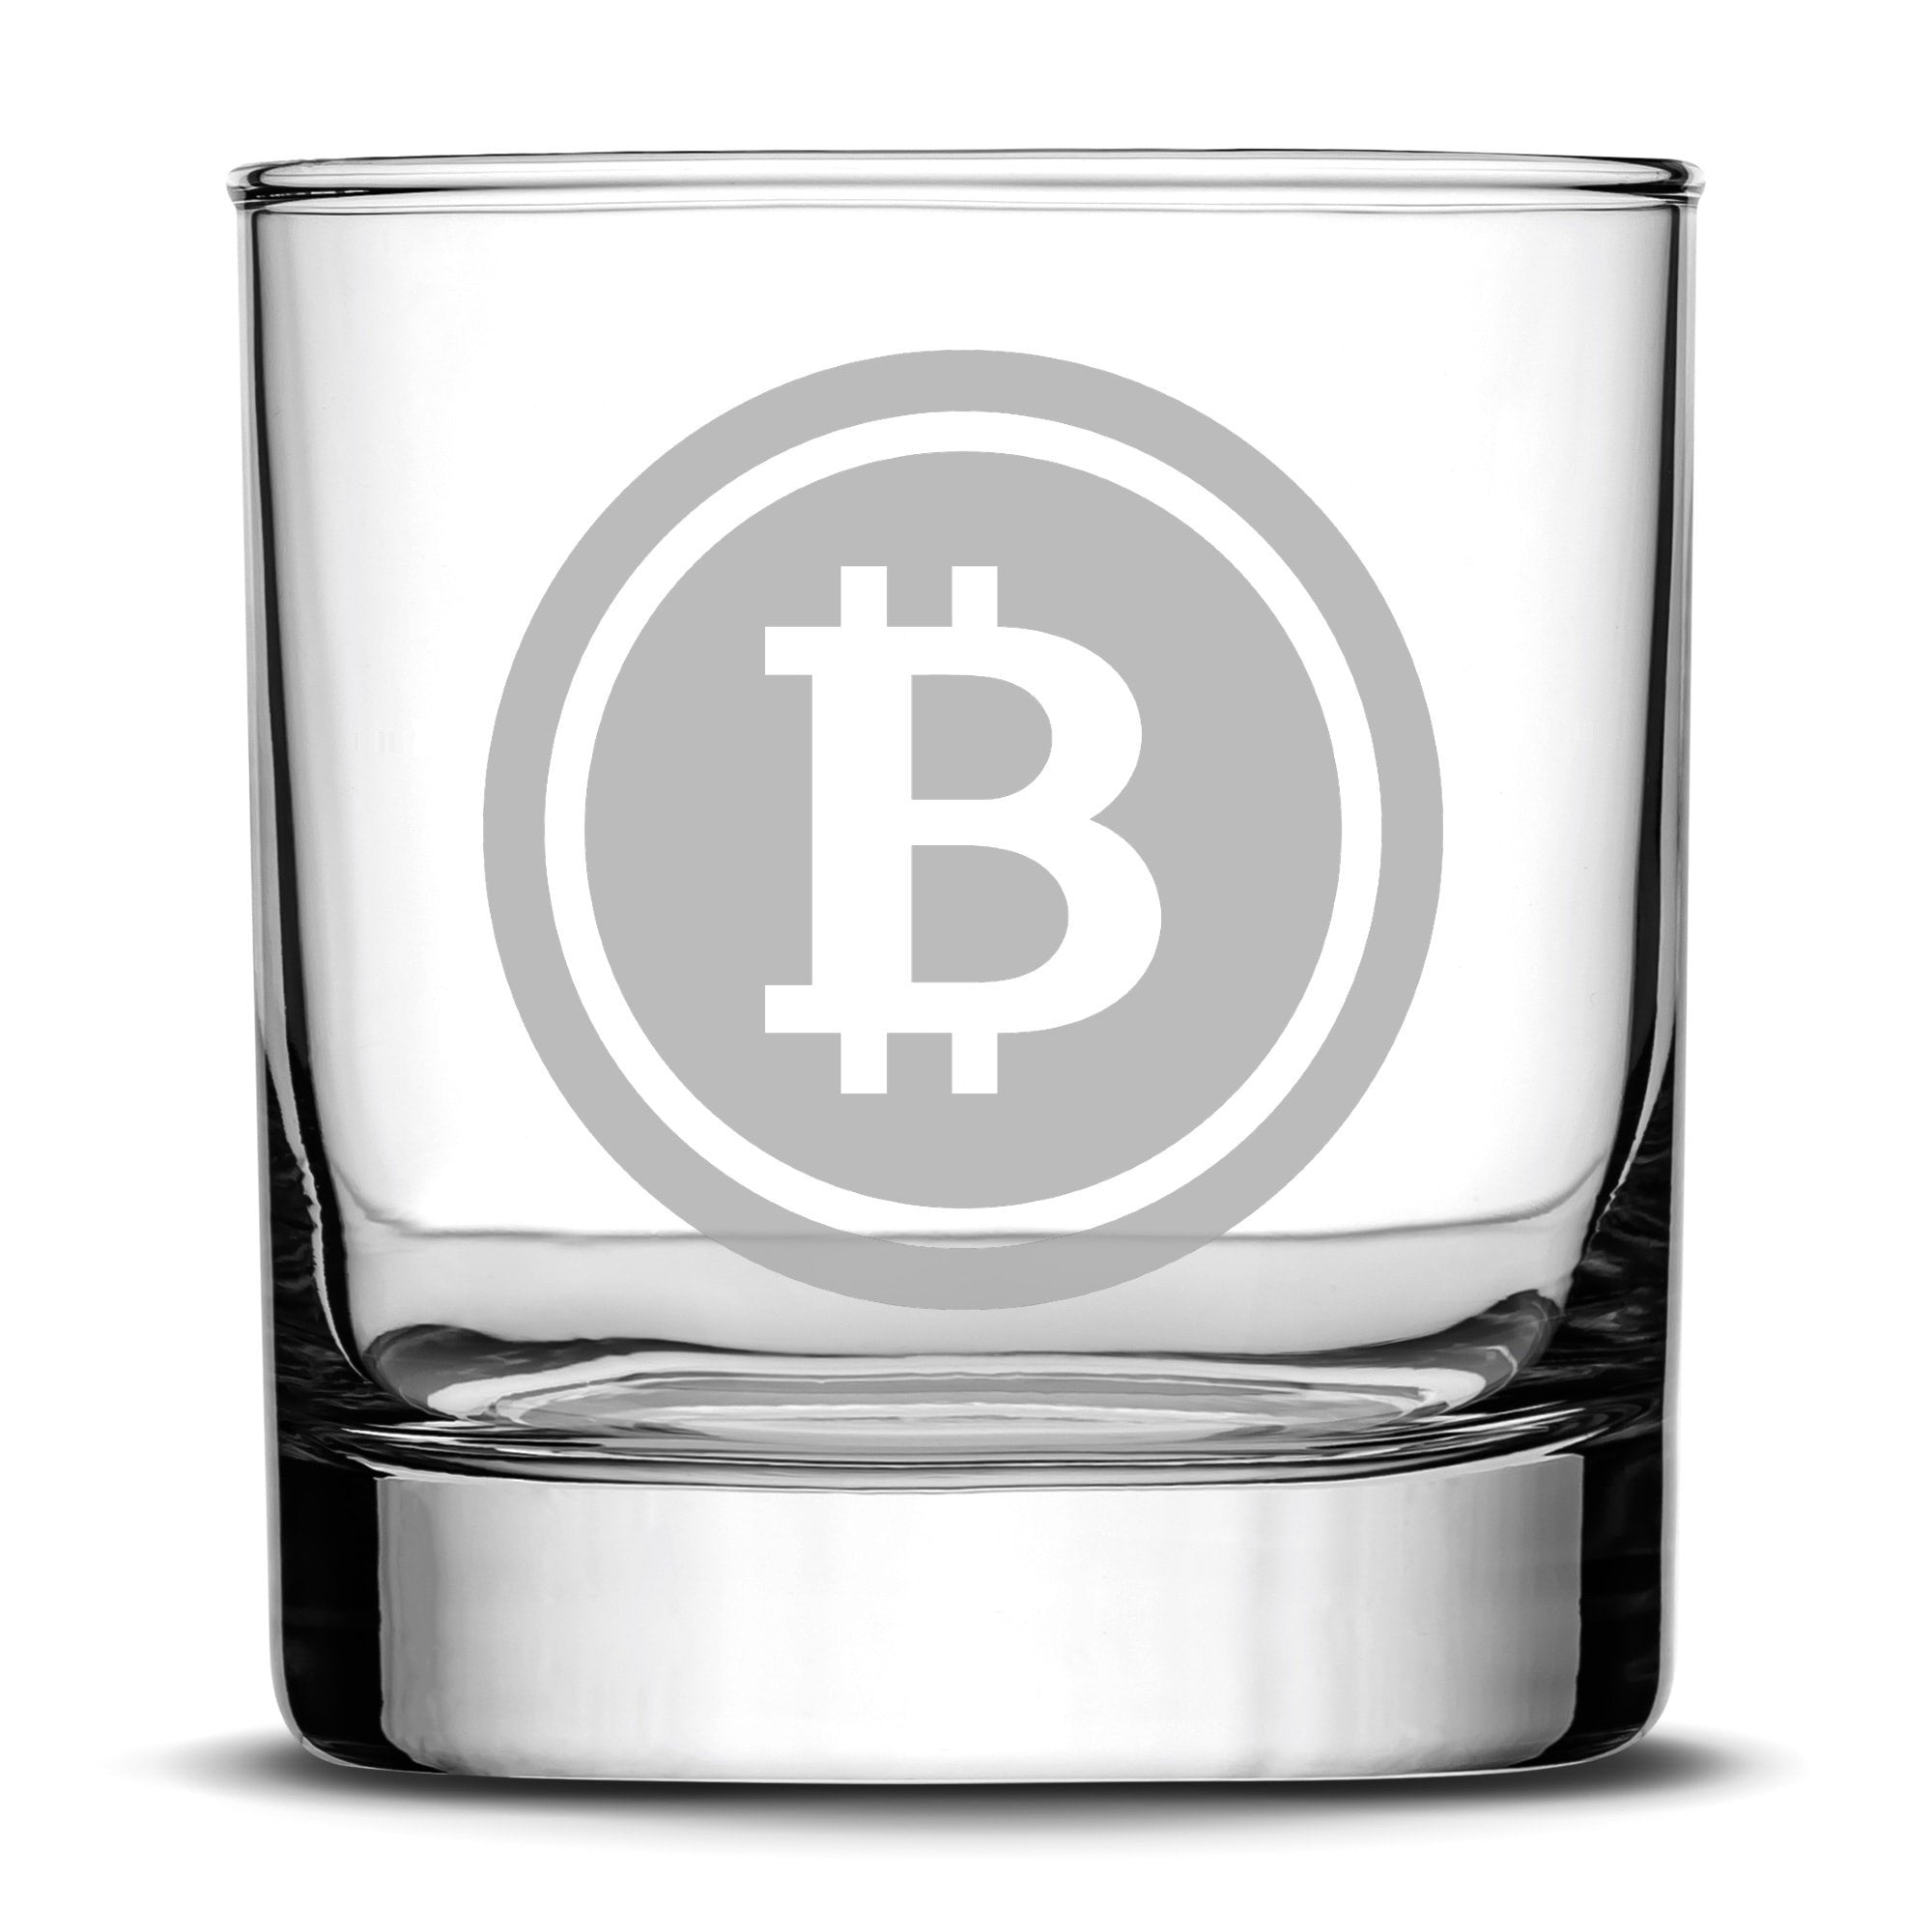 Premium Bitcoin Whiskey Glass, 10oz Deep Etched Rocks Glass, Made in USA by Integrity Bottles